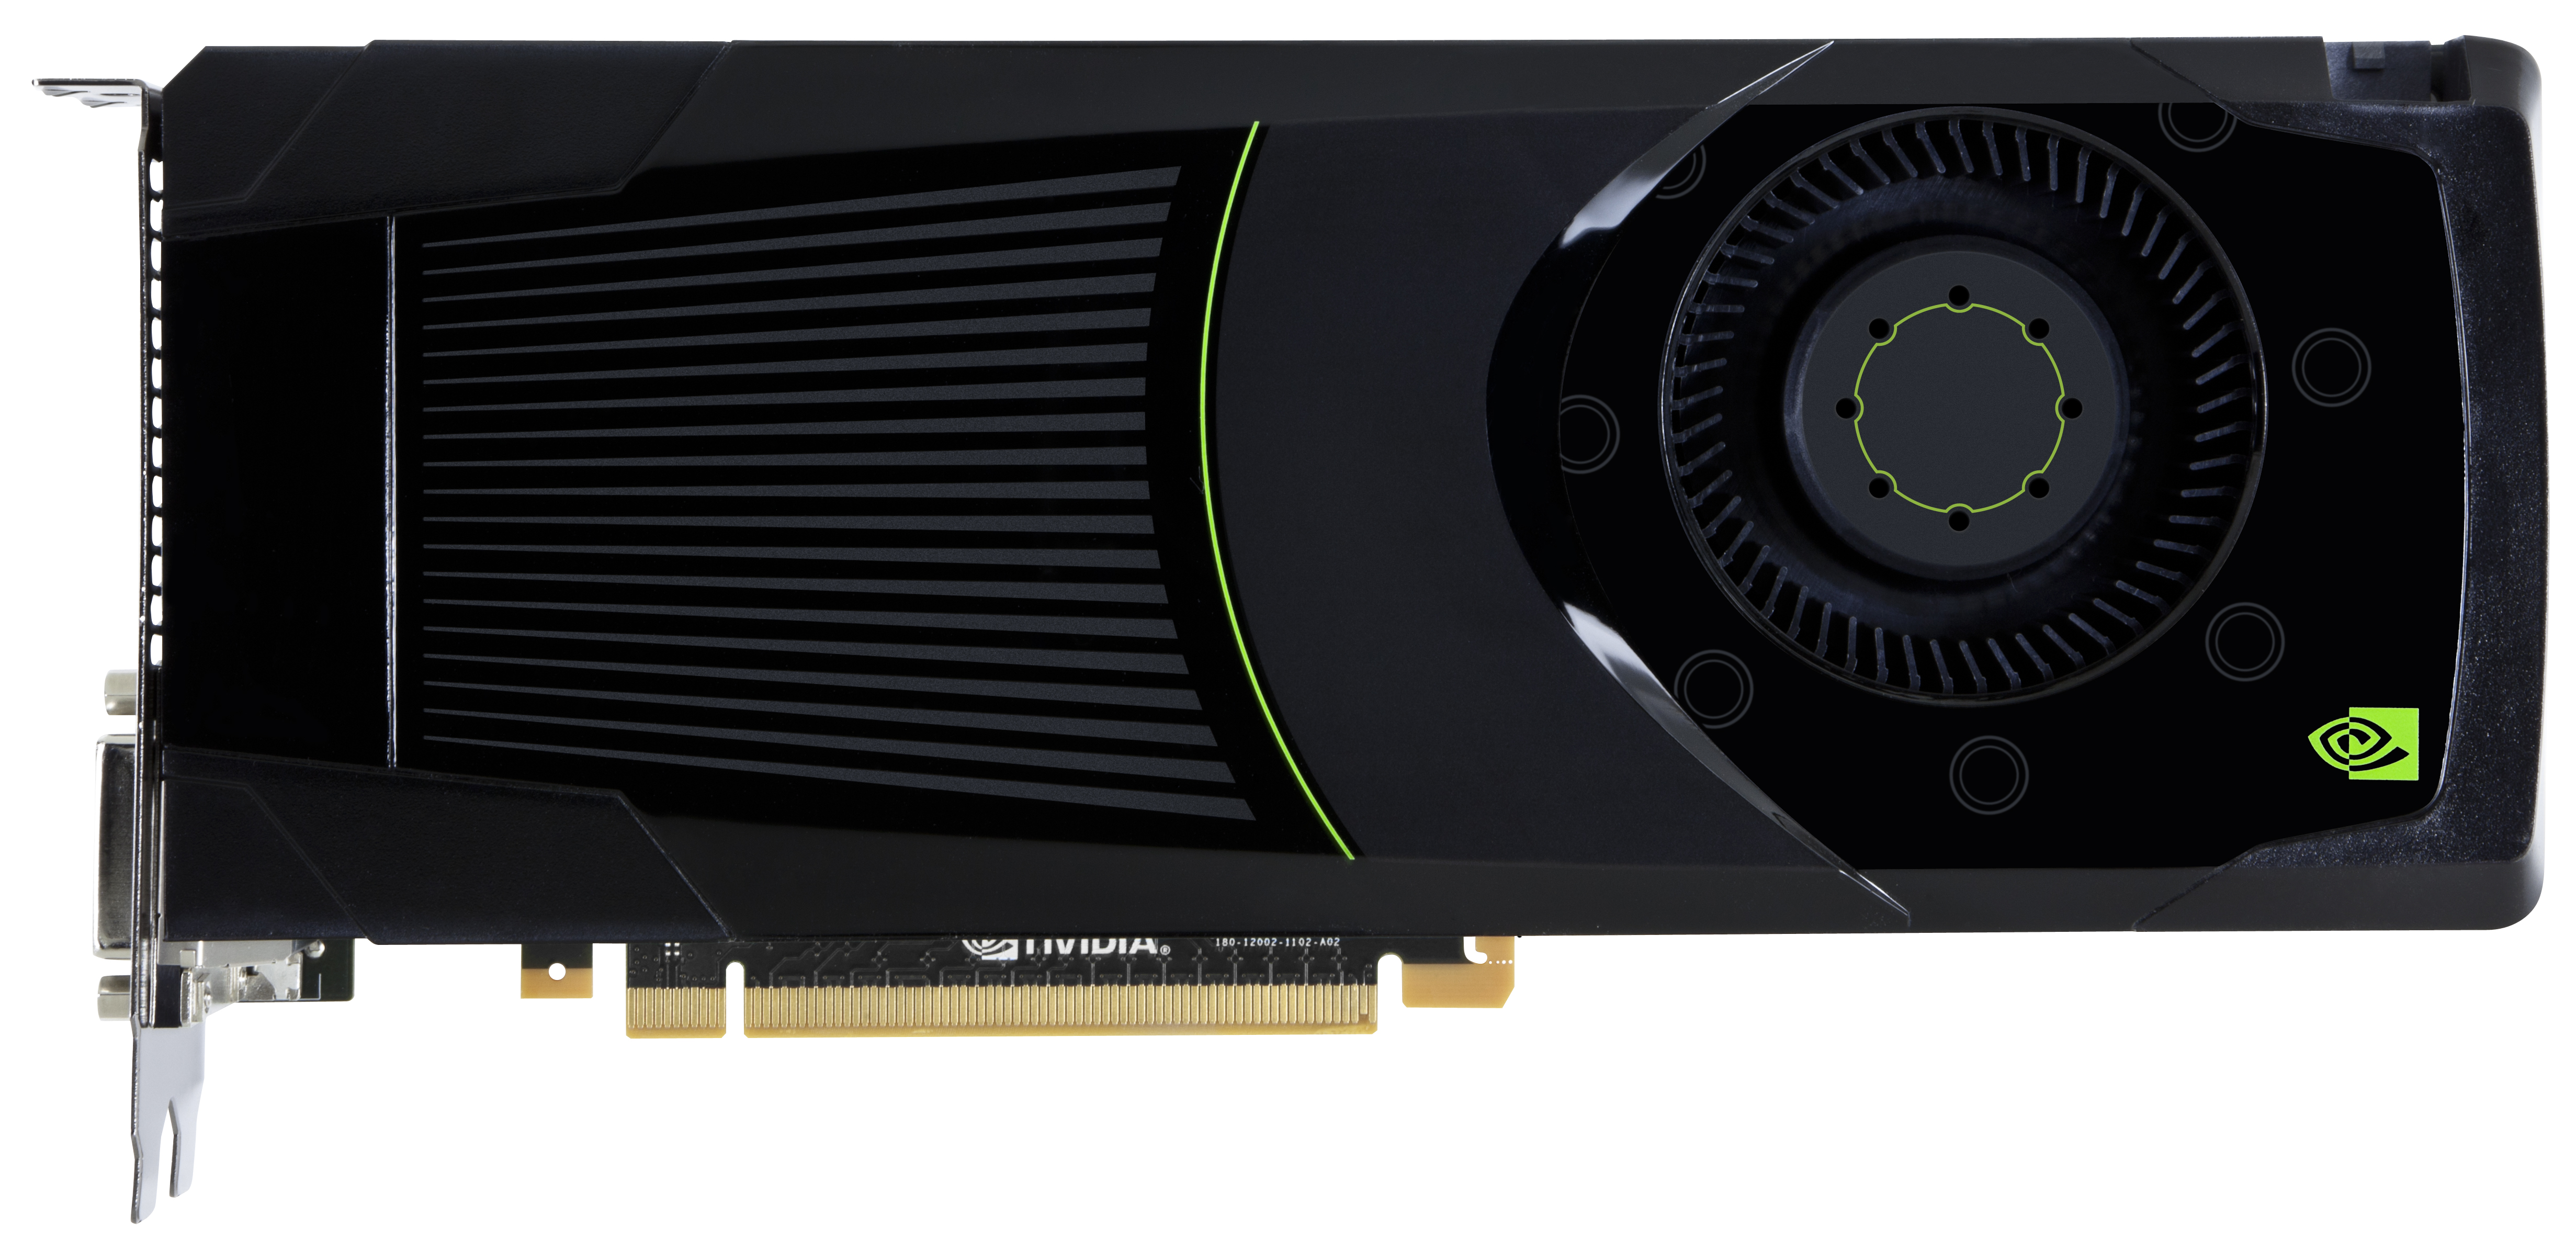 nvidia-geforce-gtx-680-review-retaking-the-performance-crown